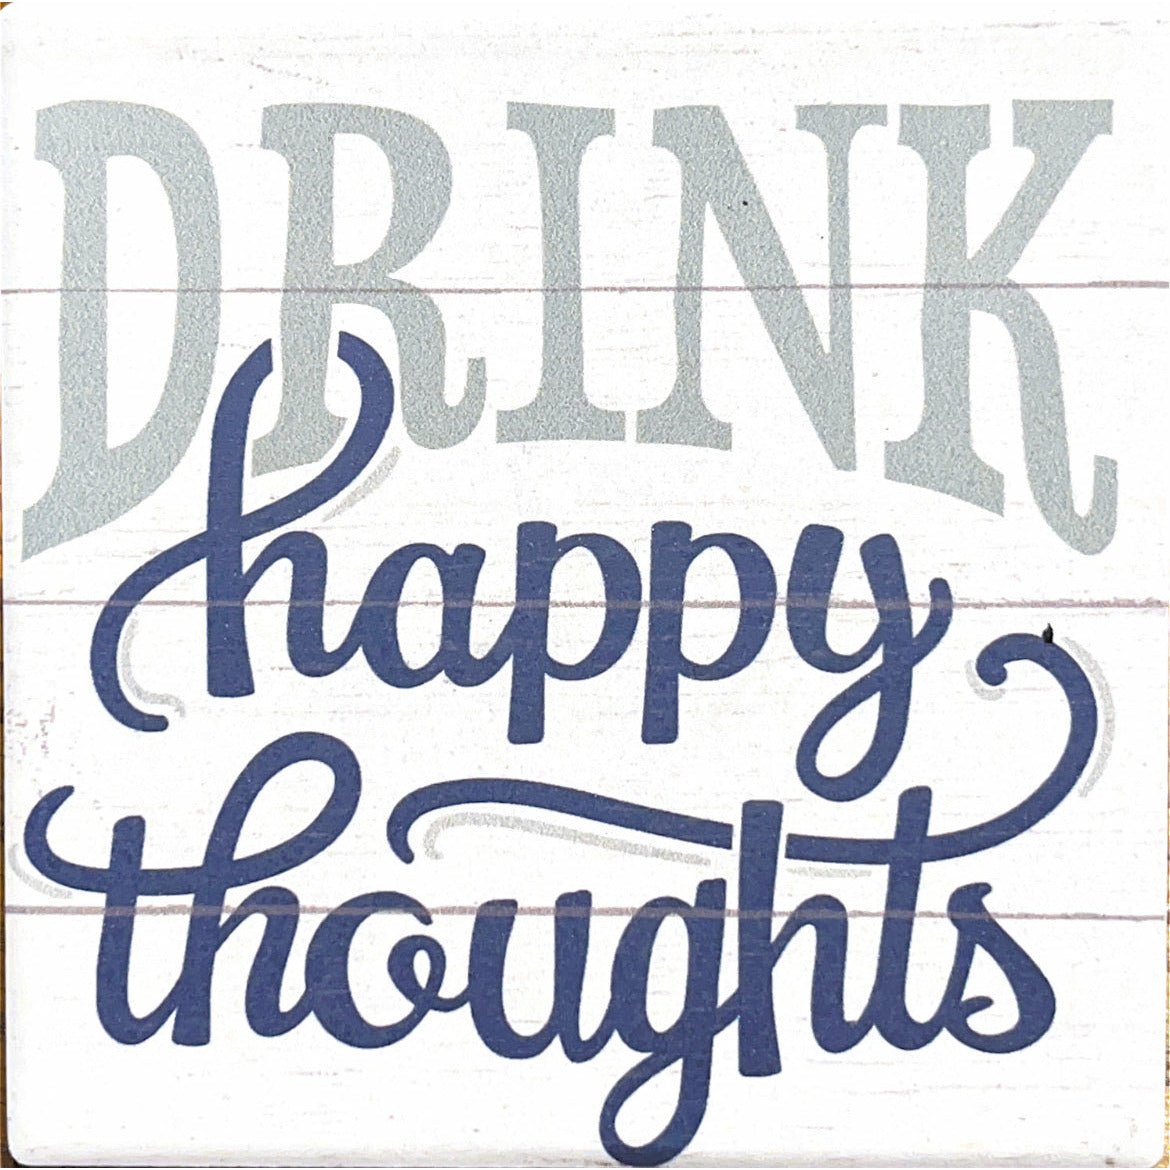 Happy Thoughts Coaster